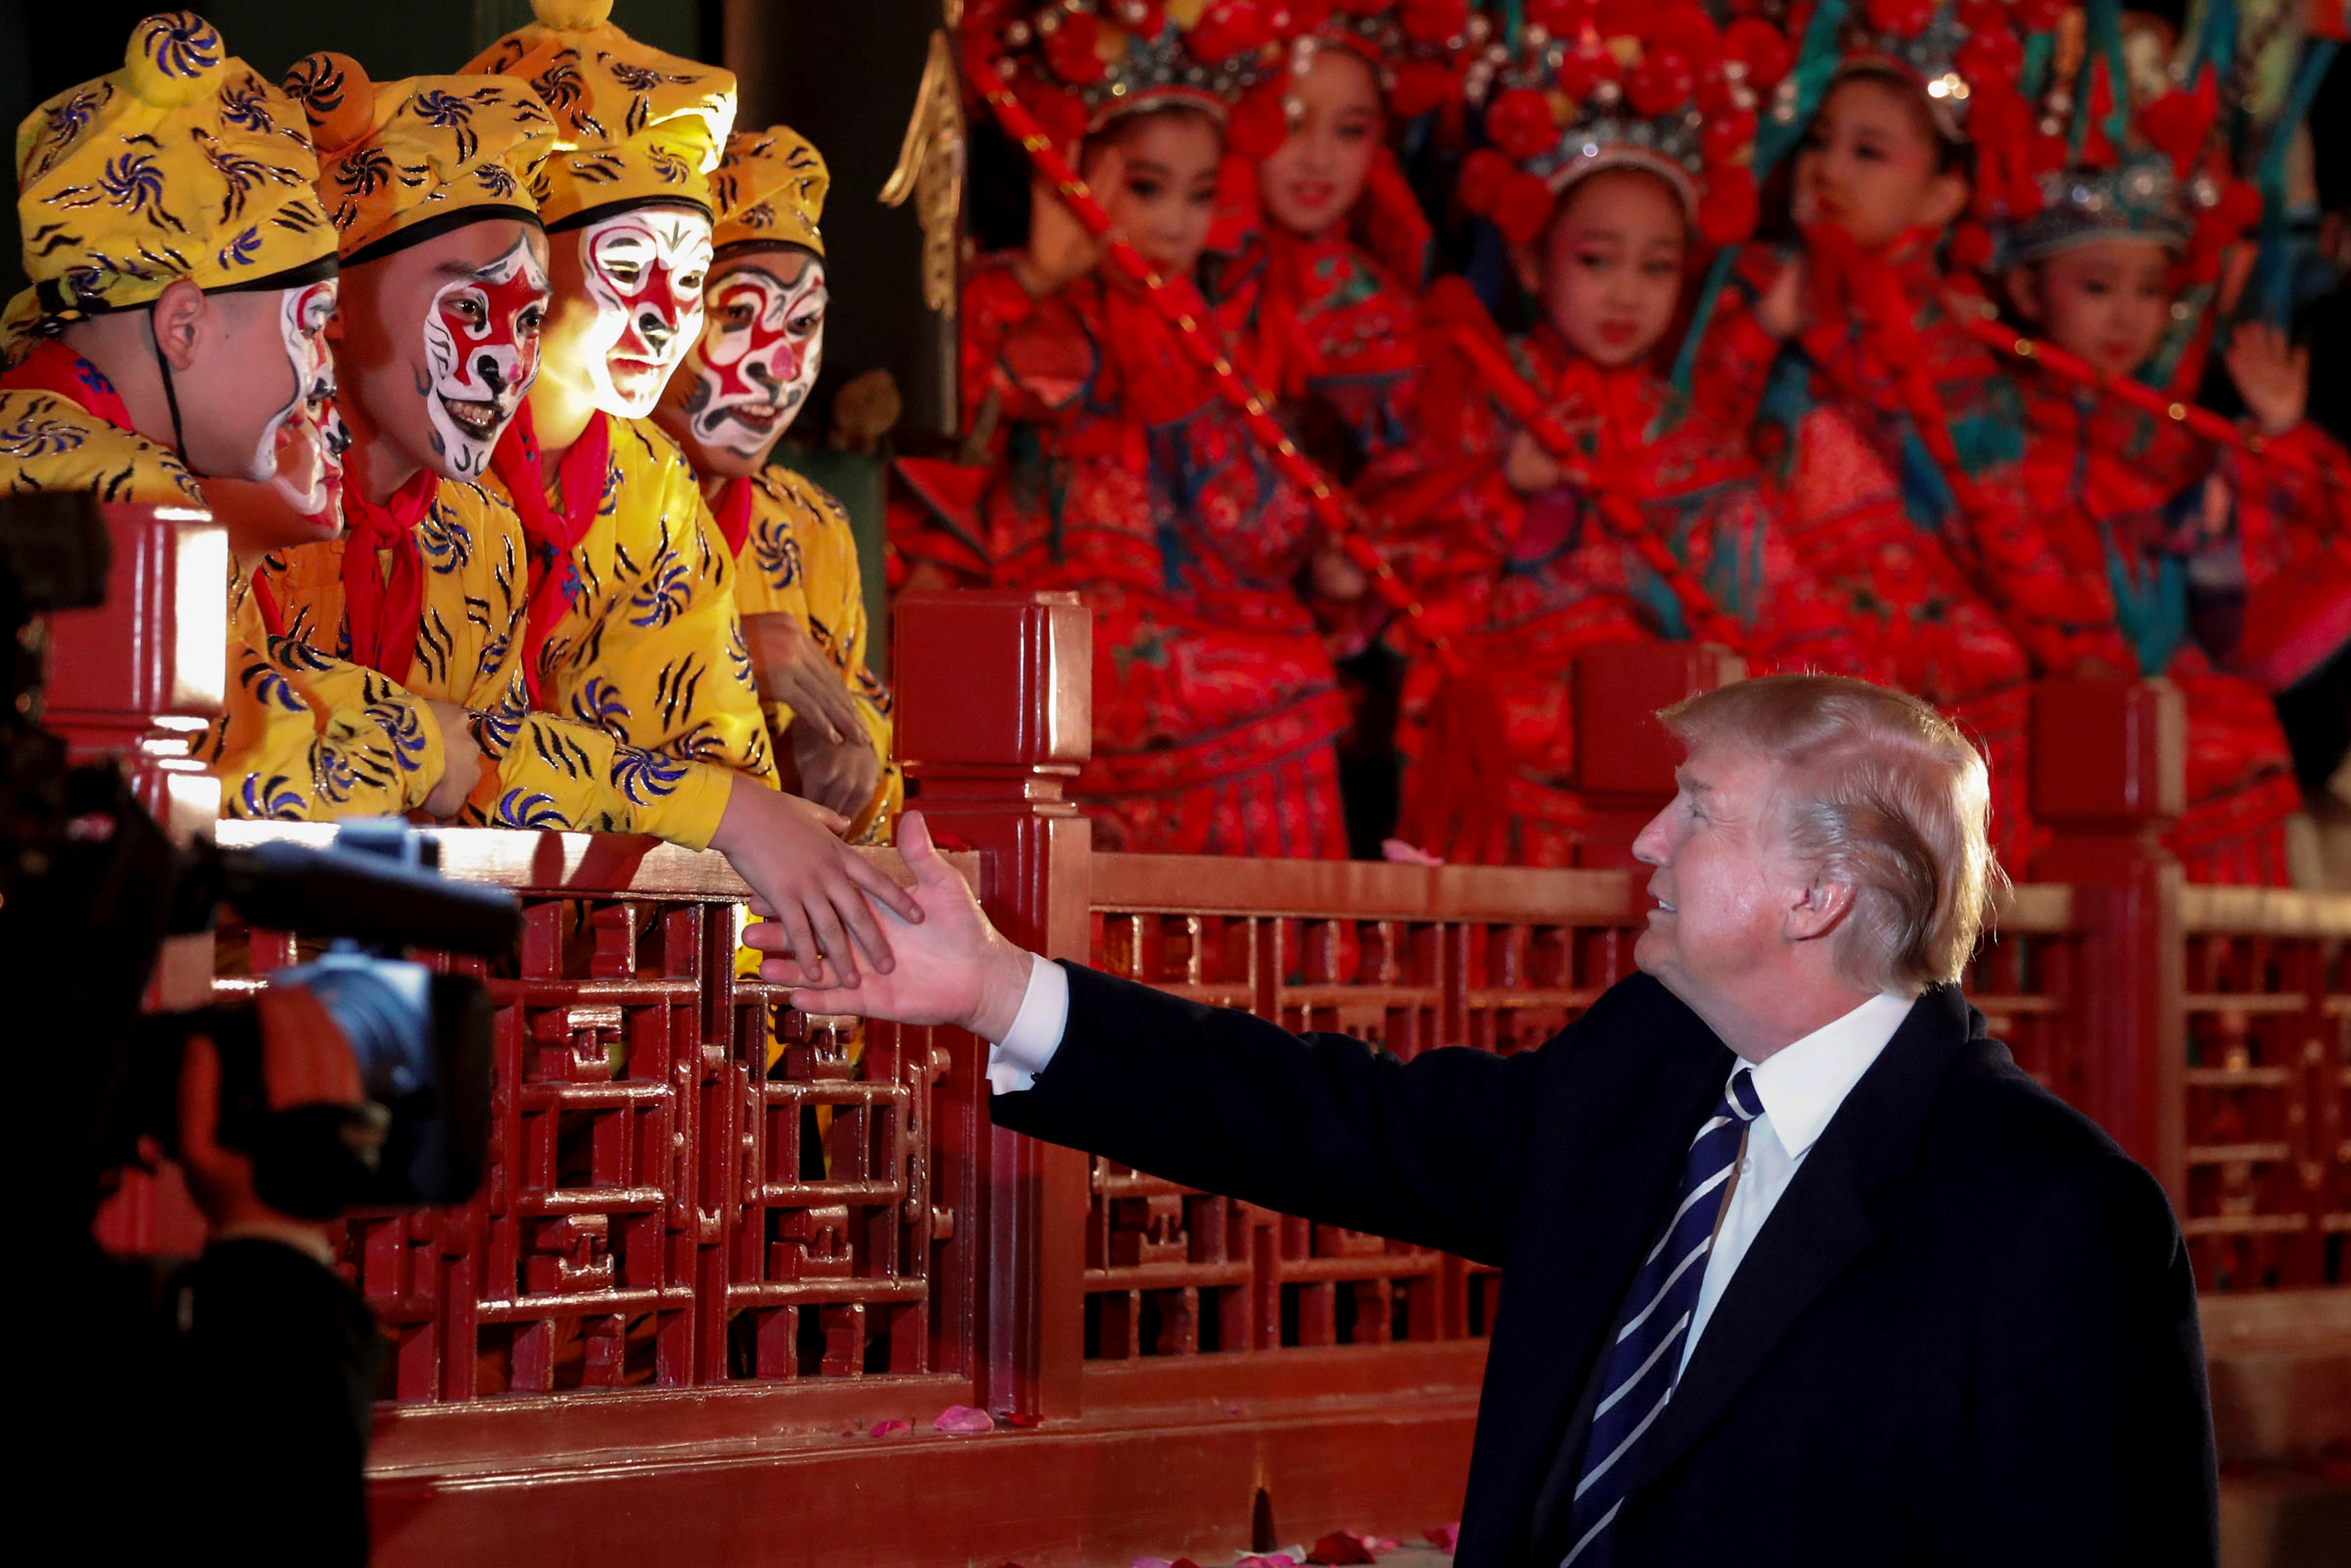 U.S. President Donald Trump shakes hands with opera performers at the Forbidden City in Beijing